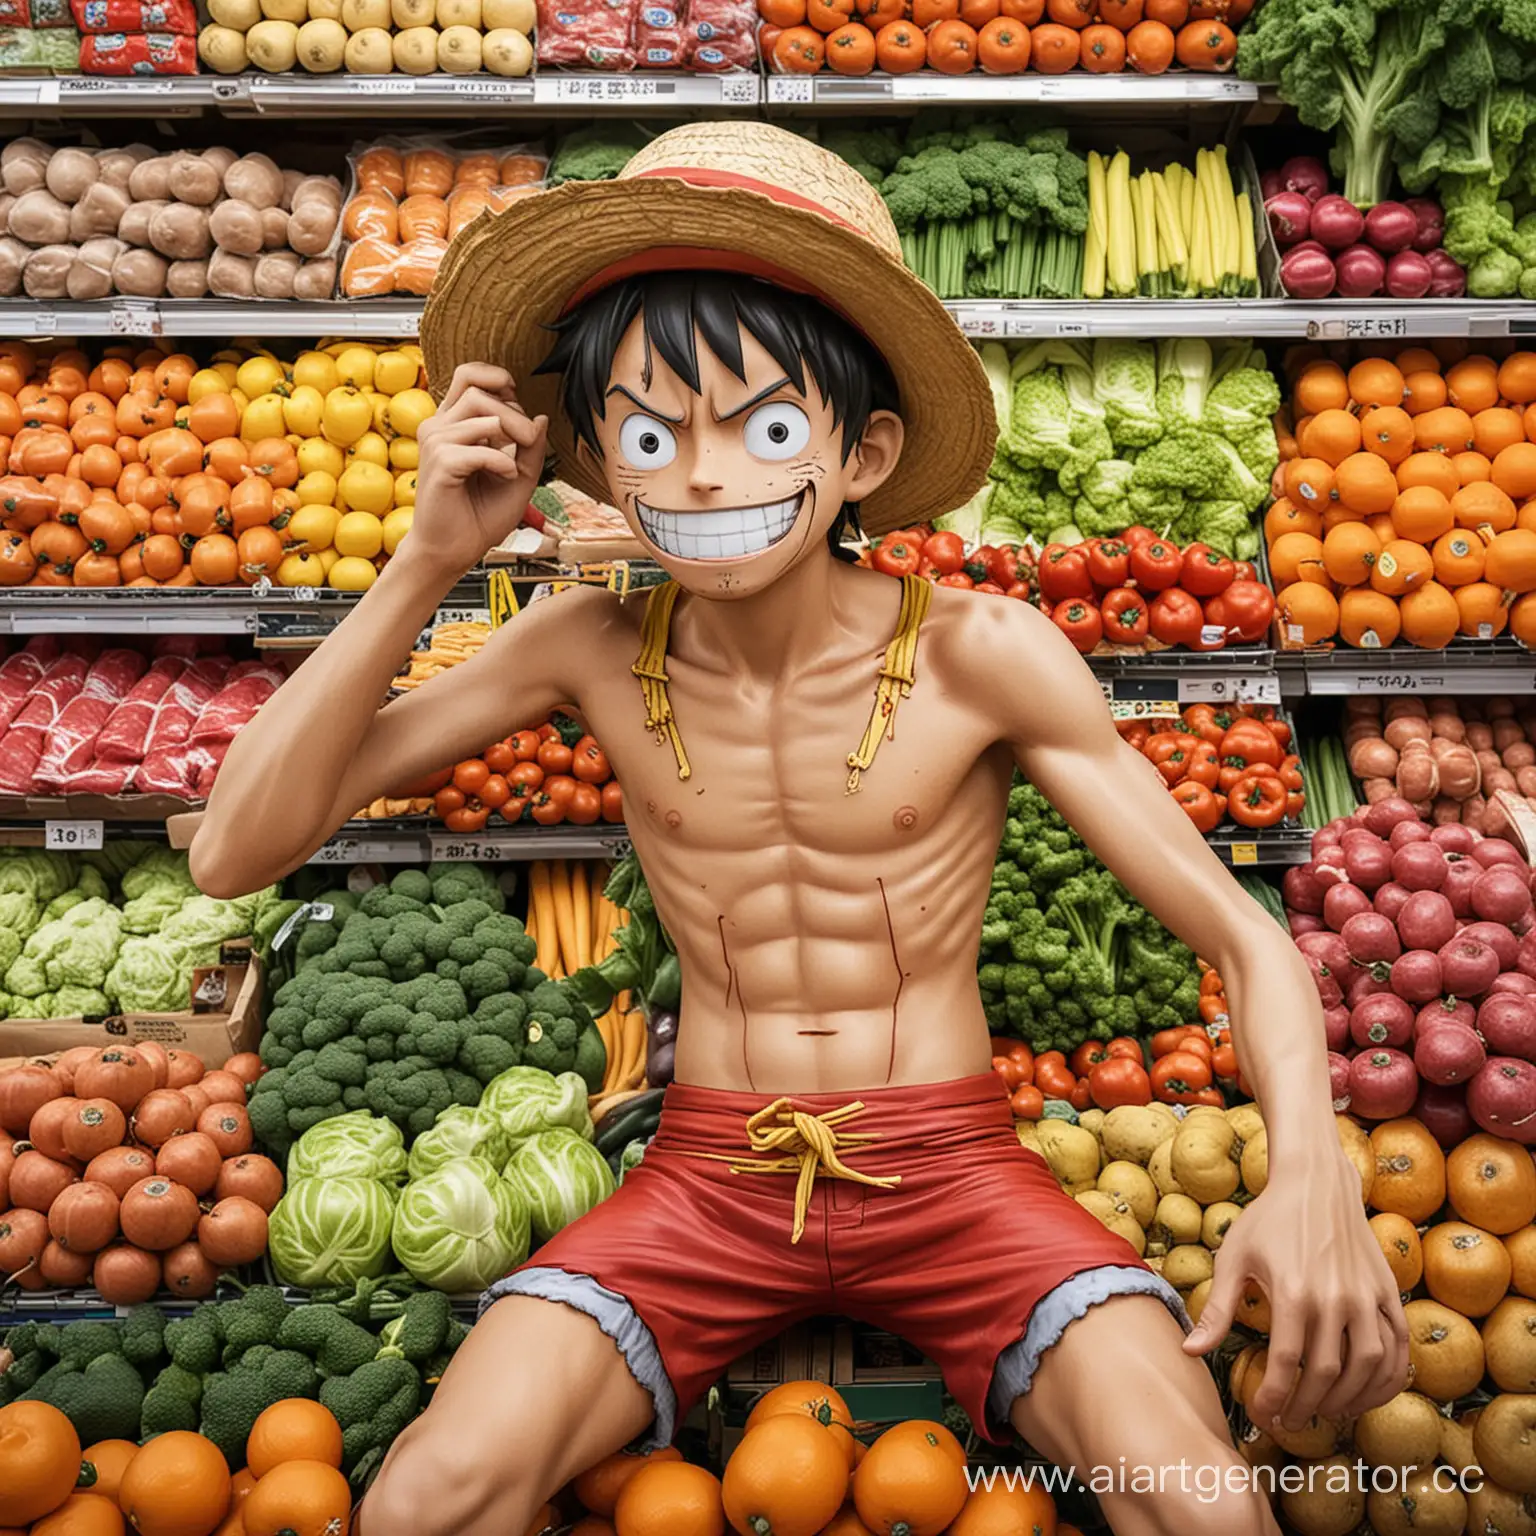 Monkey-D-Luffy-in-a-Store-Surrounded-by-Food-Products